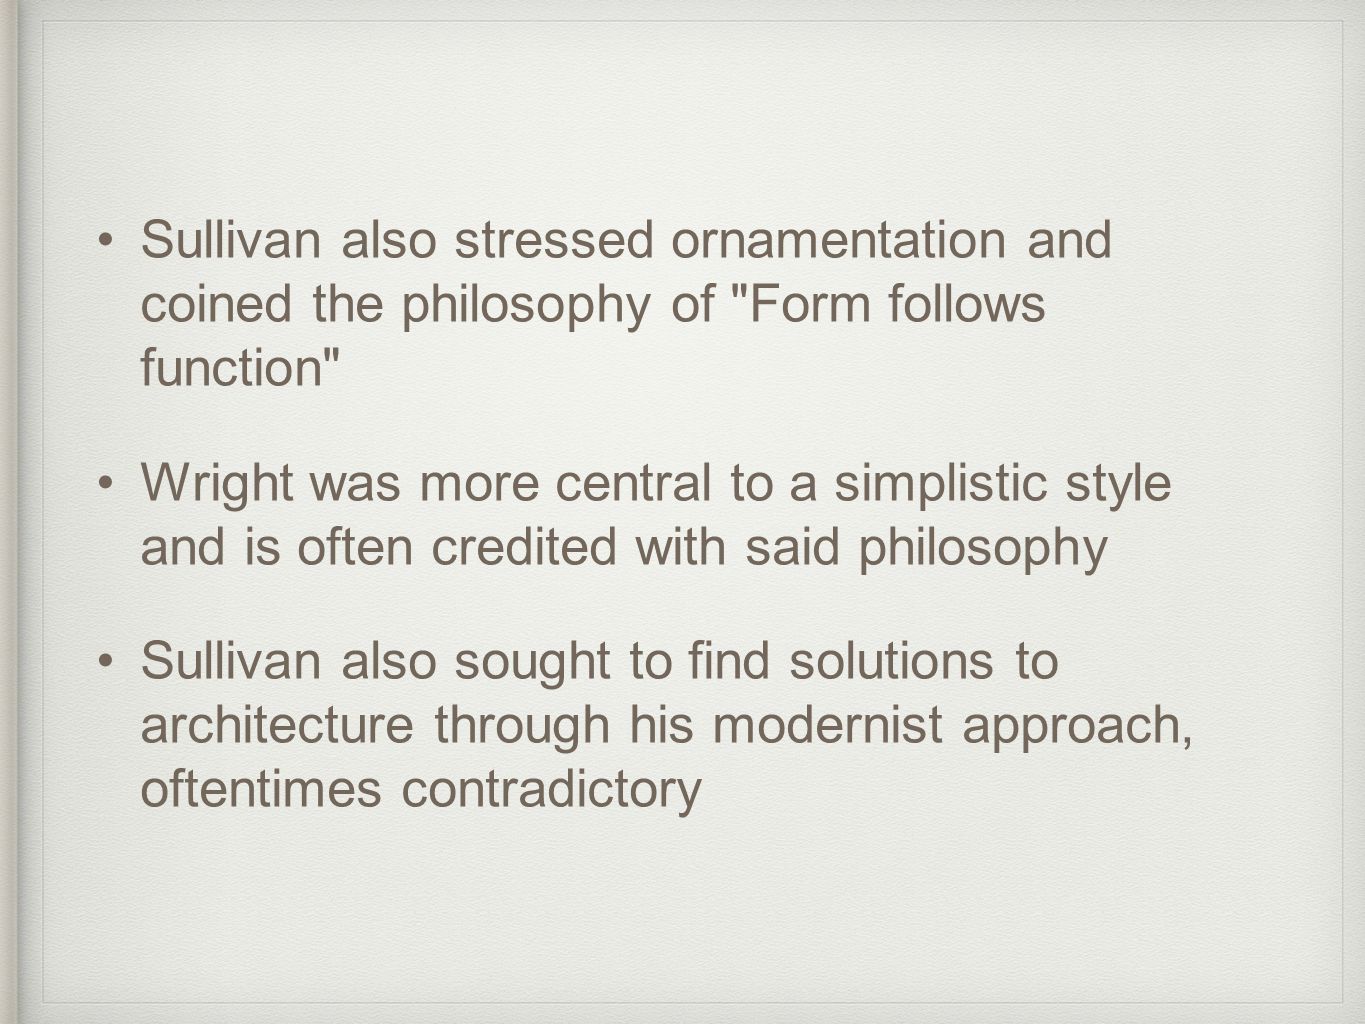 Sullivan also stressed ornamentation and coined the philosophy of Form follows function